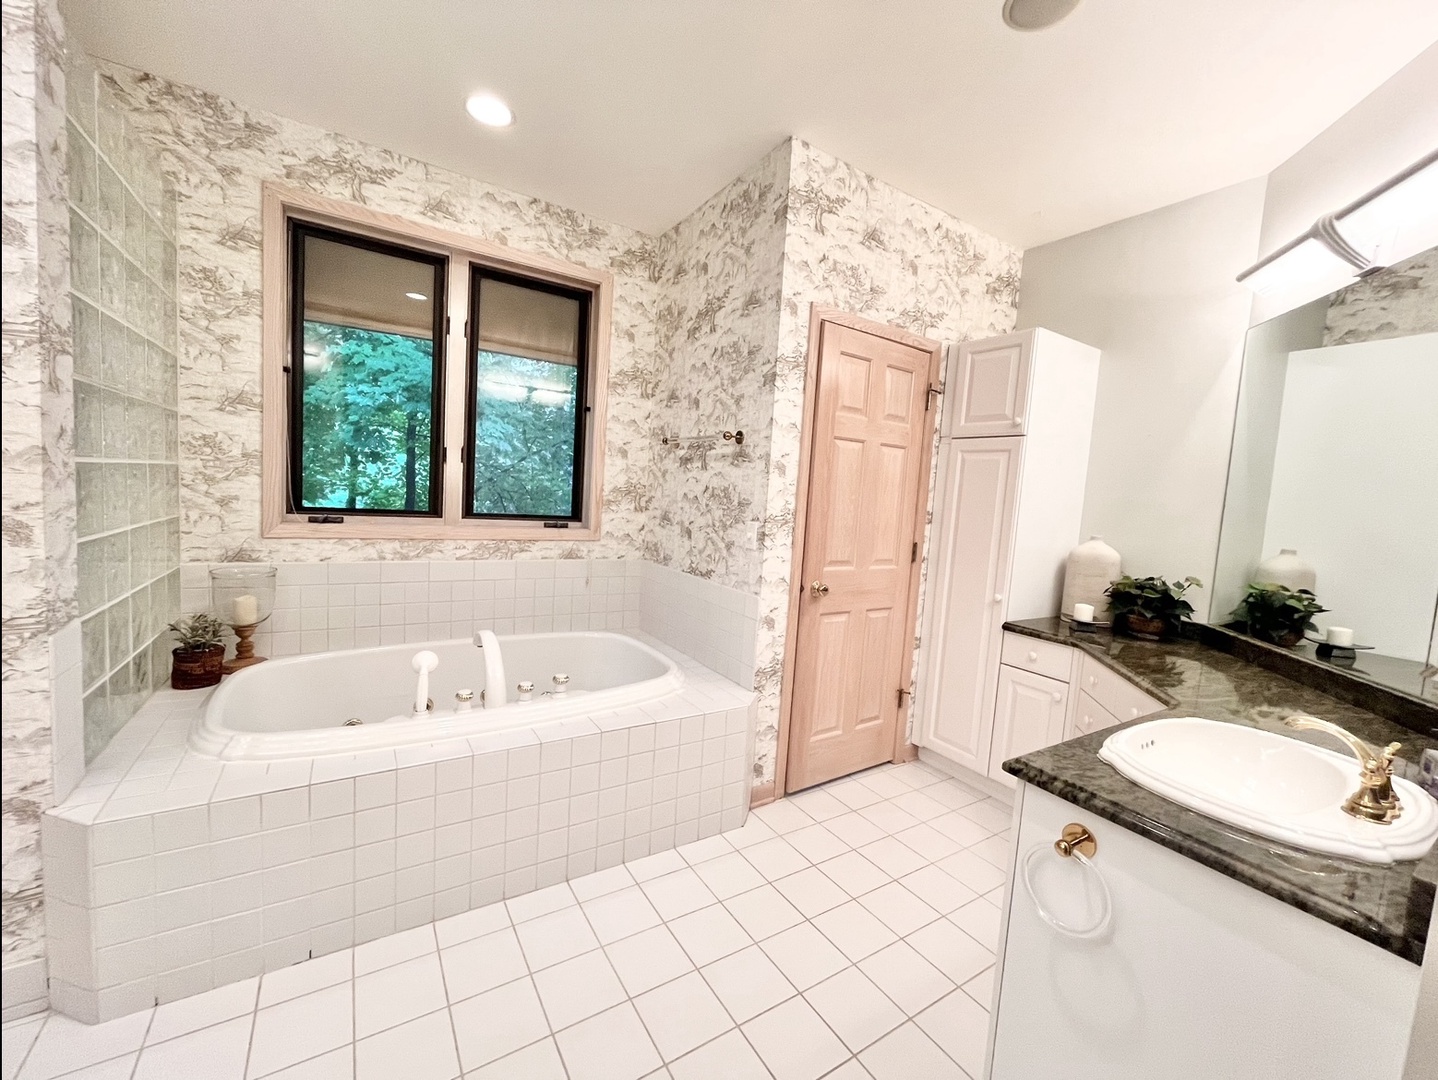 The main level en suite boasts a pair of vanities, glass shower, & soaking tub